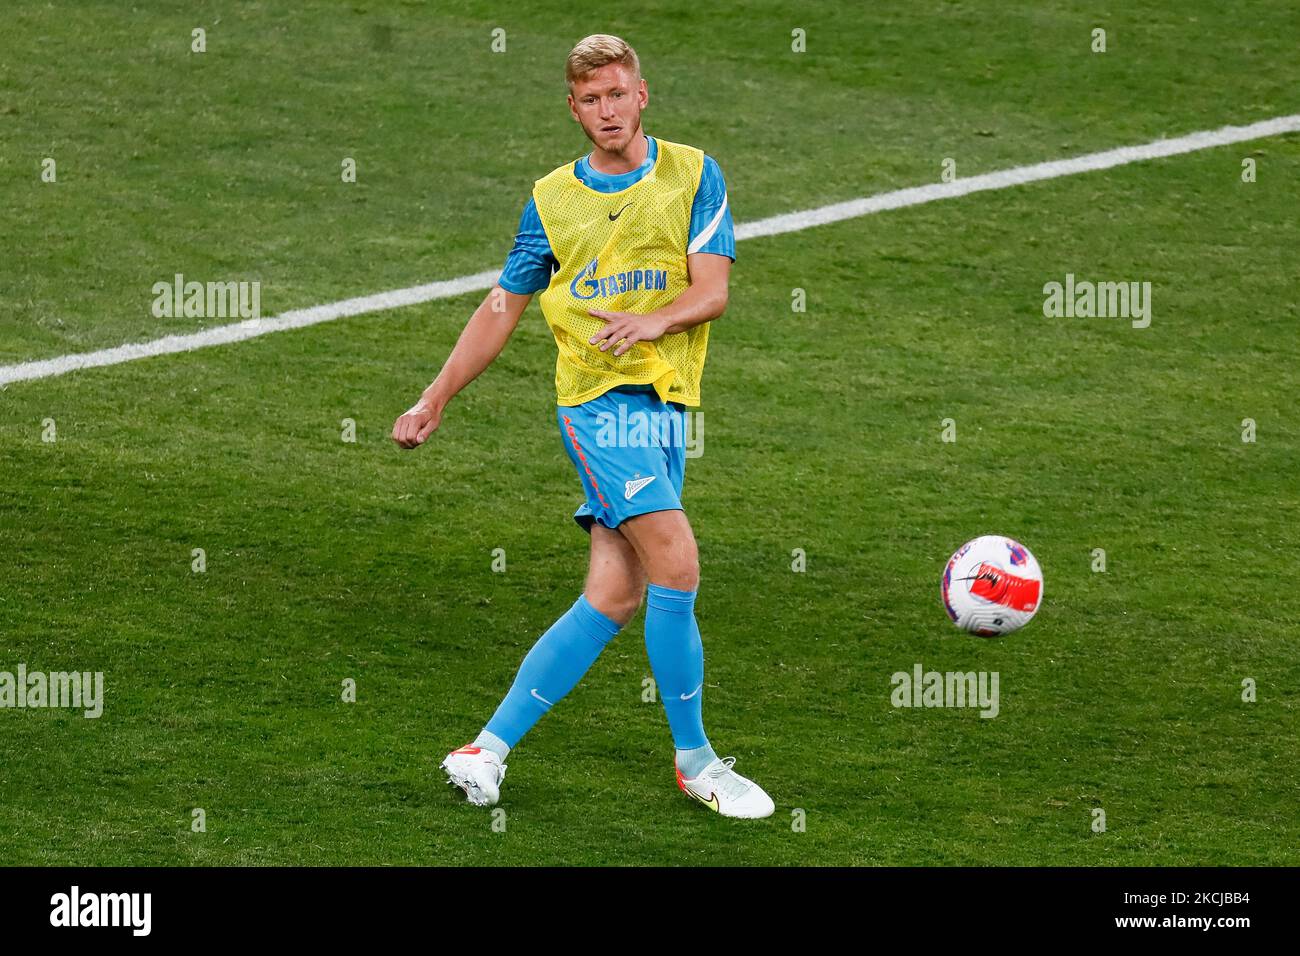 Dmitri Chistyakov of Zenit in action during warm-up ahead of the Russian Premier League match between FC Zenit Saint Petersburg and FC Krasnodar on August 7, 2021 at Gazprom Arena in Saint Petersburg, Russia. (Photo by Mike Kireev/NurPhoto) Stock Photo